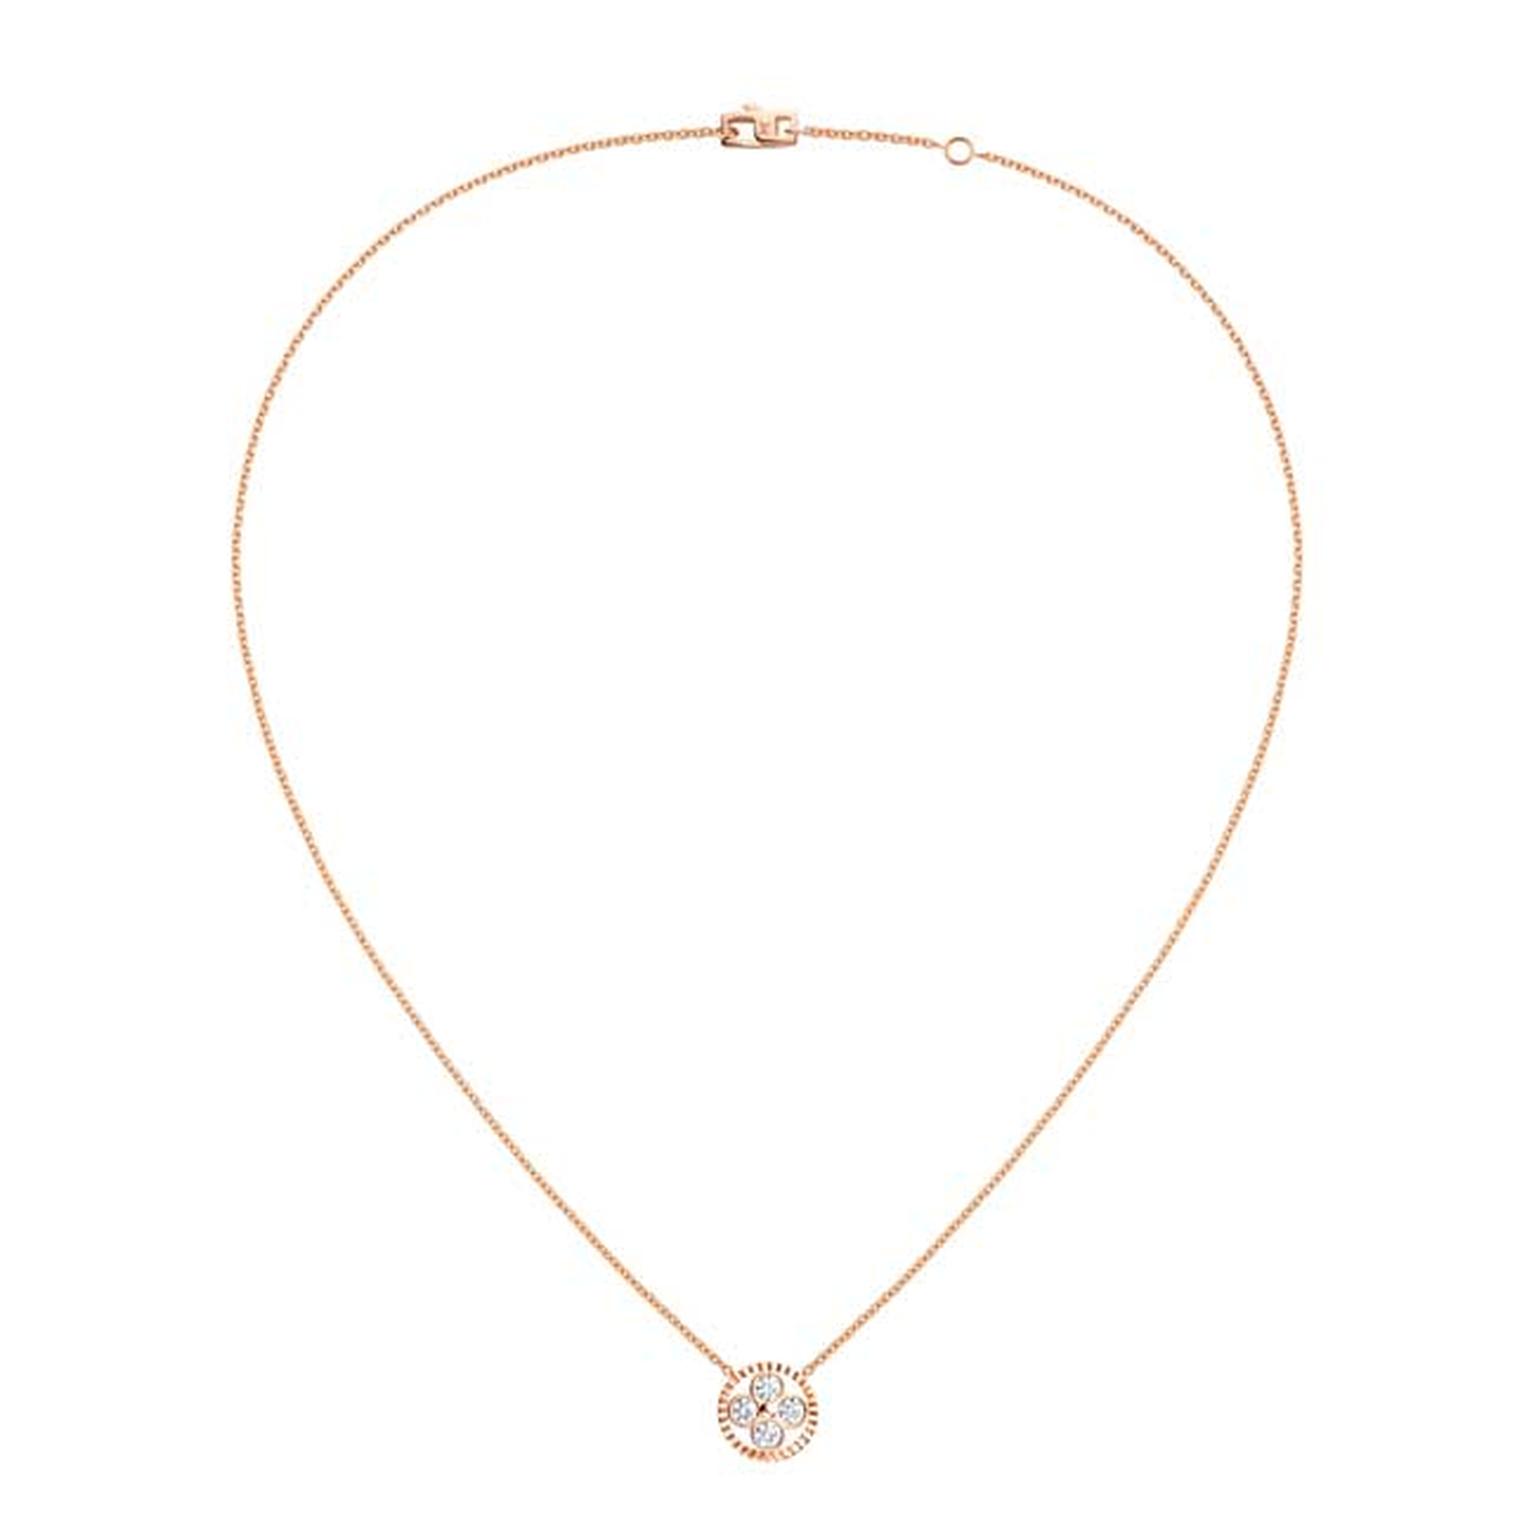 Louis Vuitton Monogram Sun and Stars collection Sun pendant necklace in rose gold_main